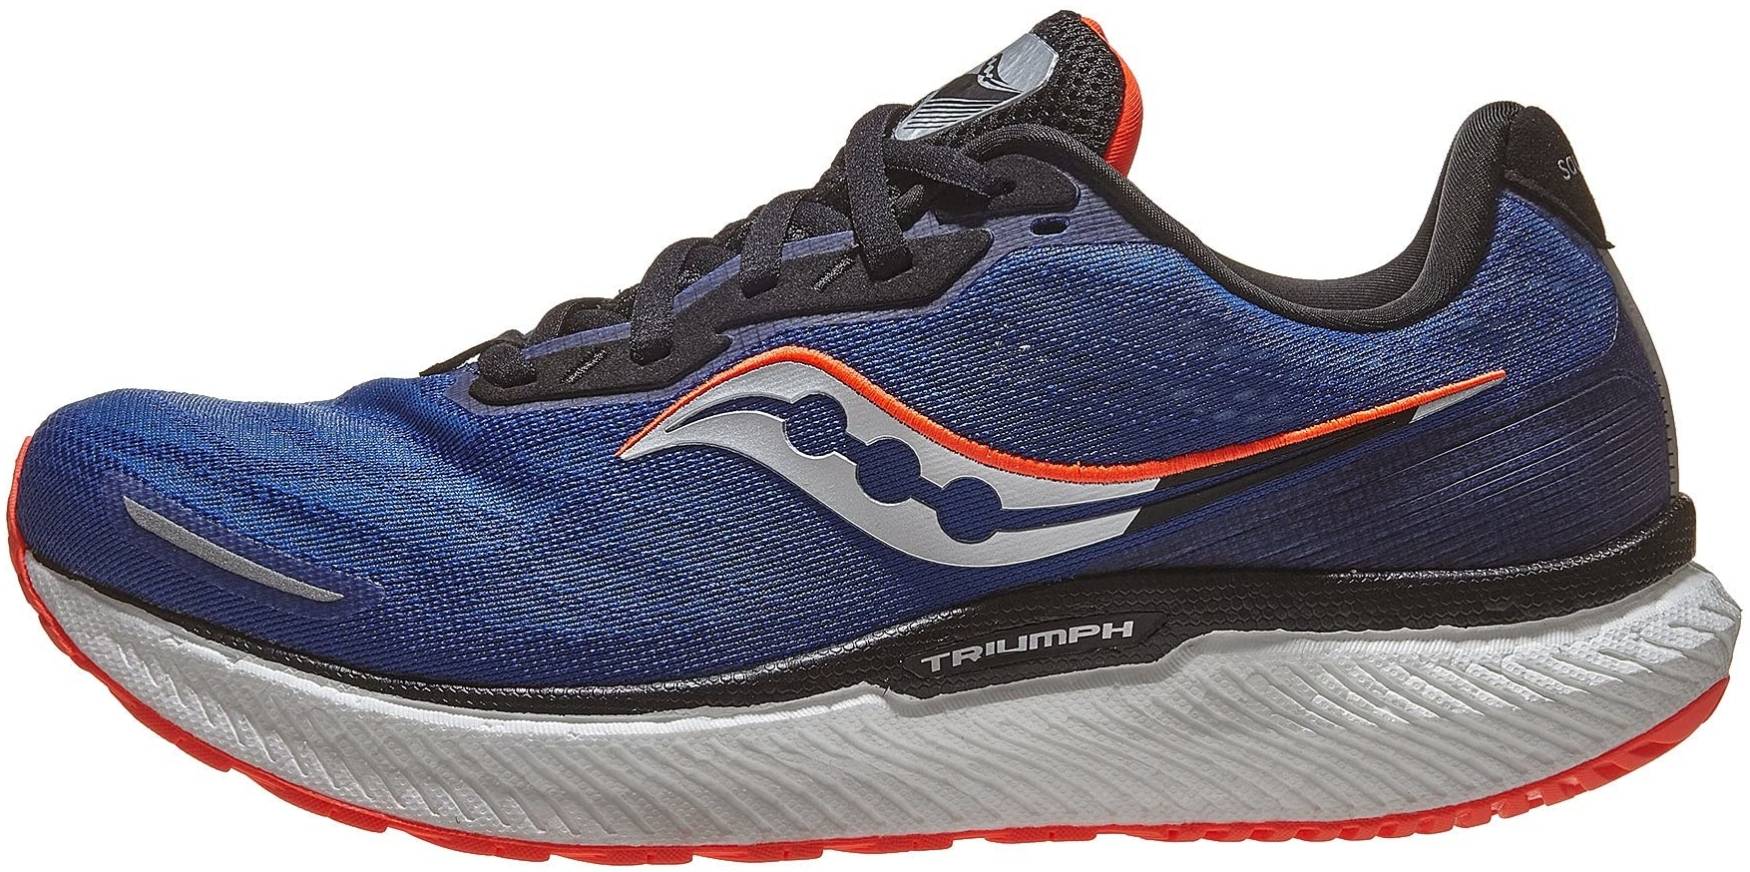 Details about   Saucony Triumph Mens Neutral Running Shoes Trainers sizes 9 and 8.5 